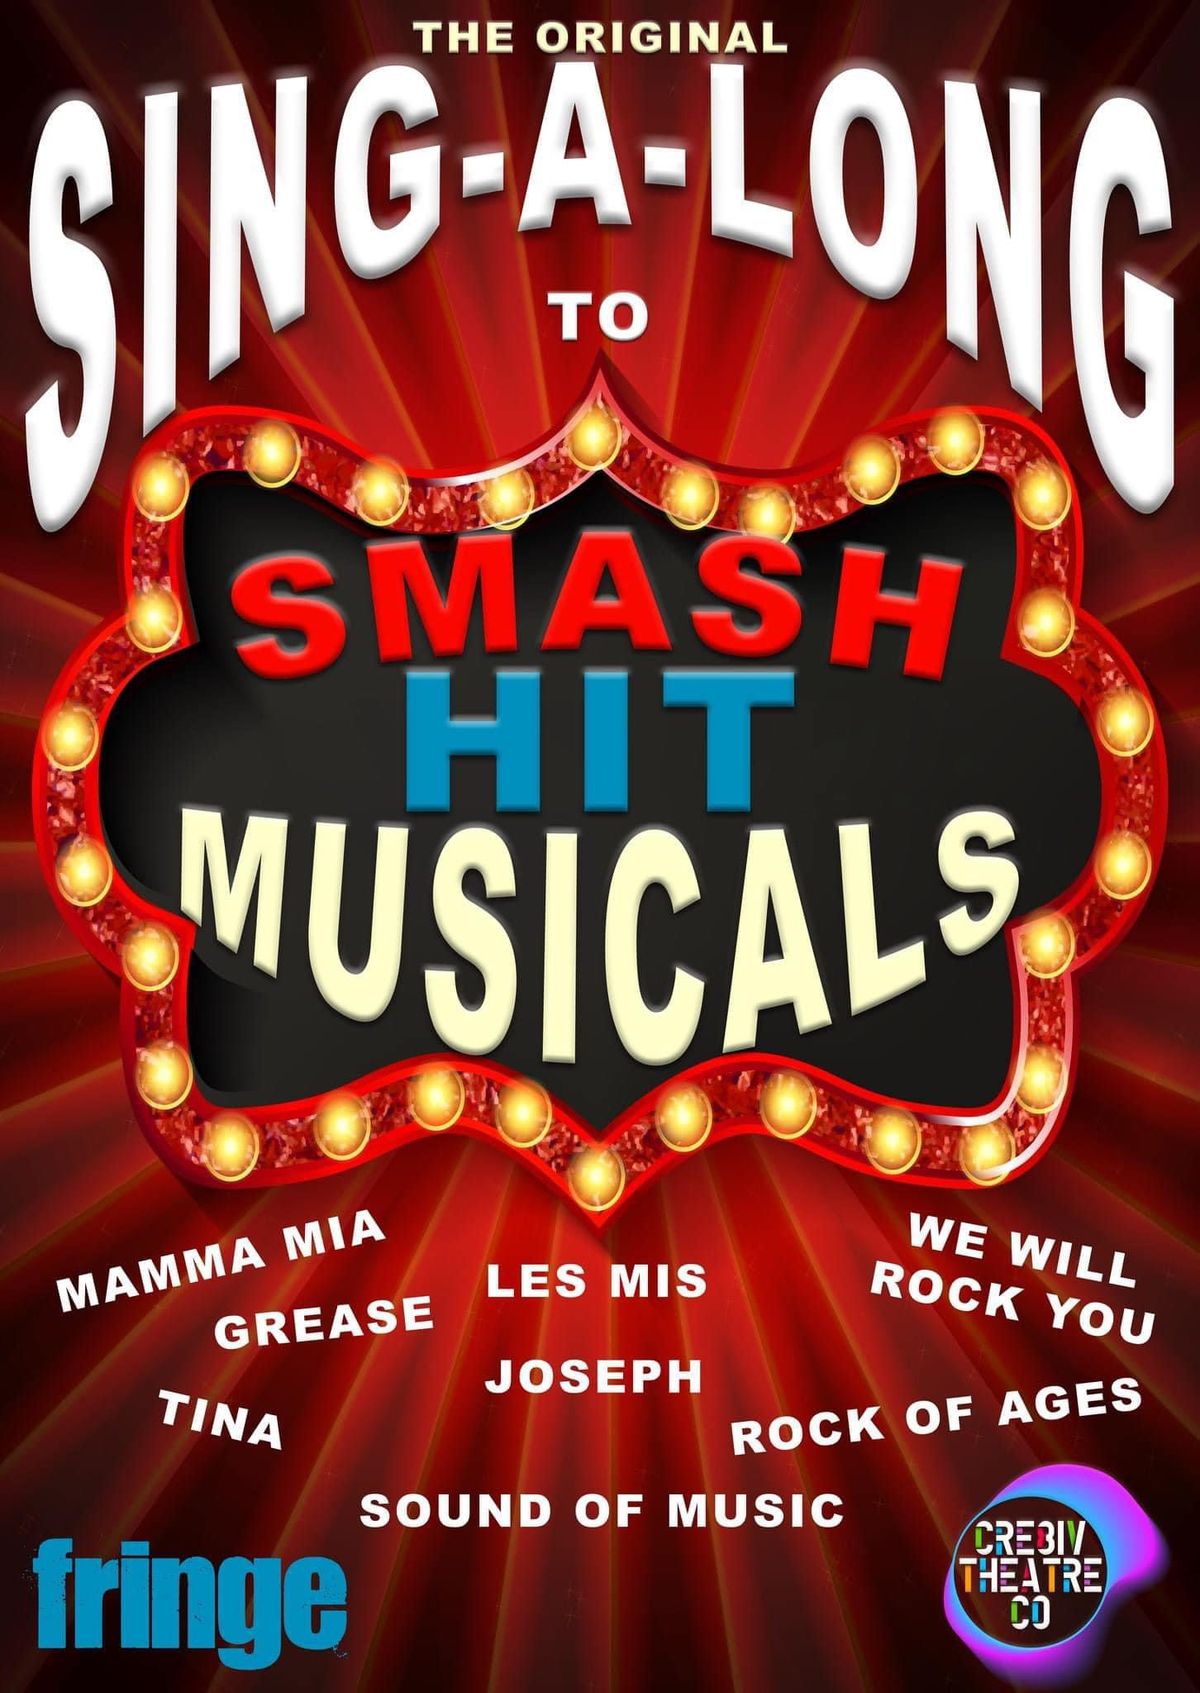 The Original Sing-A-Long to SMASH HIT MUSICALS